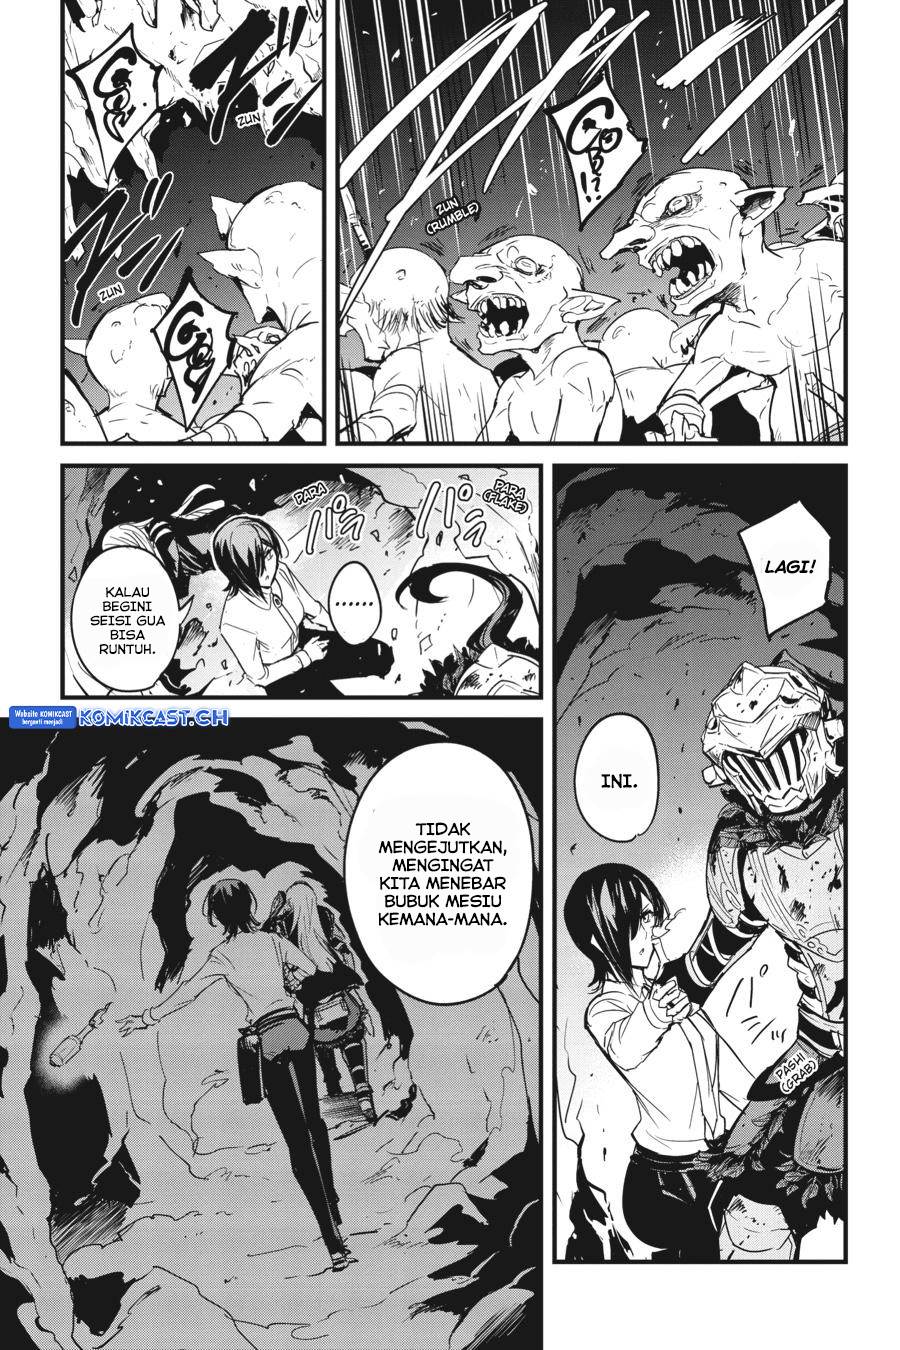 Goblin Slayer: Side Story Year One Chapter 71